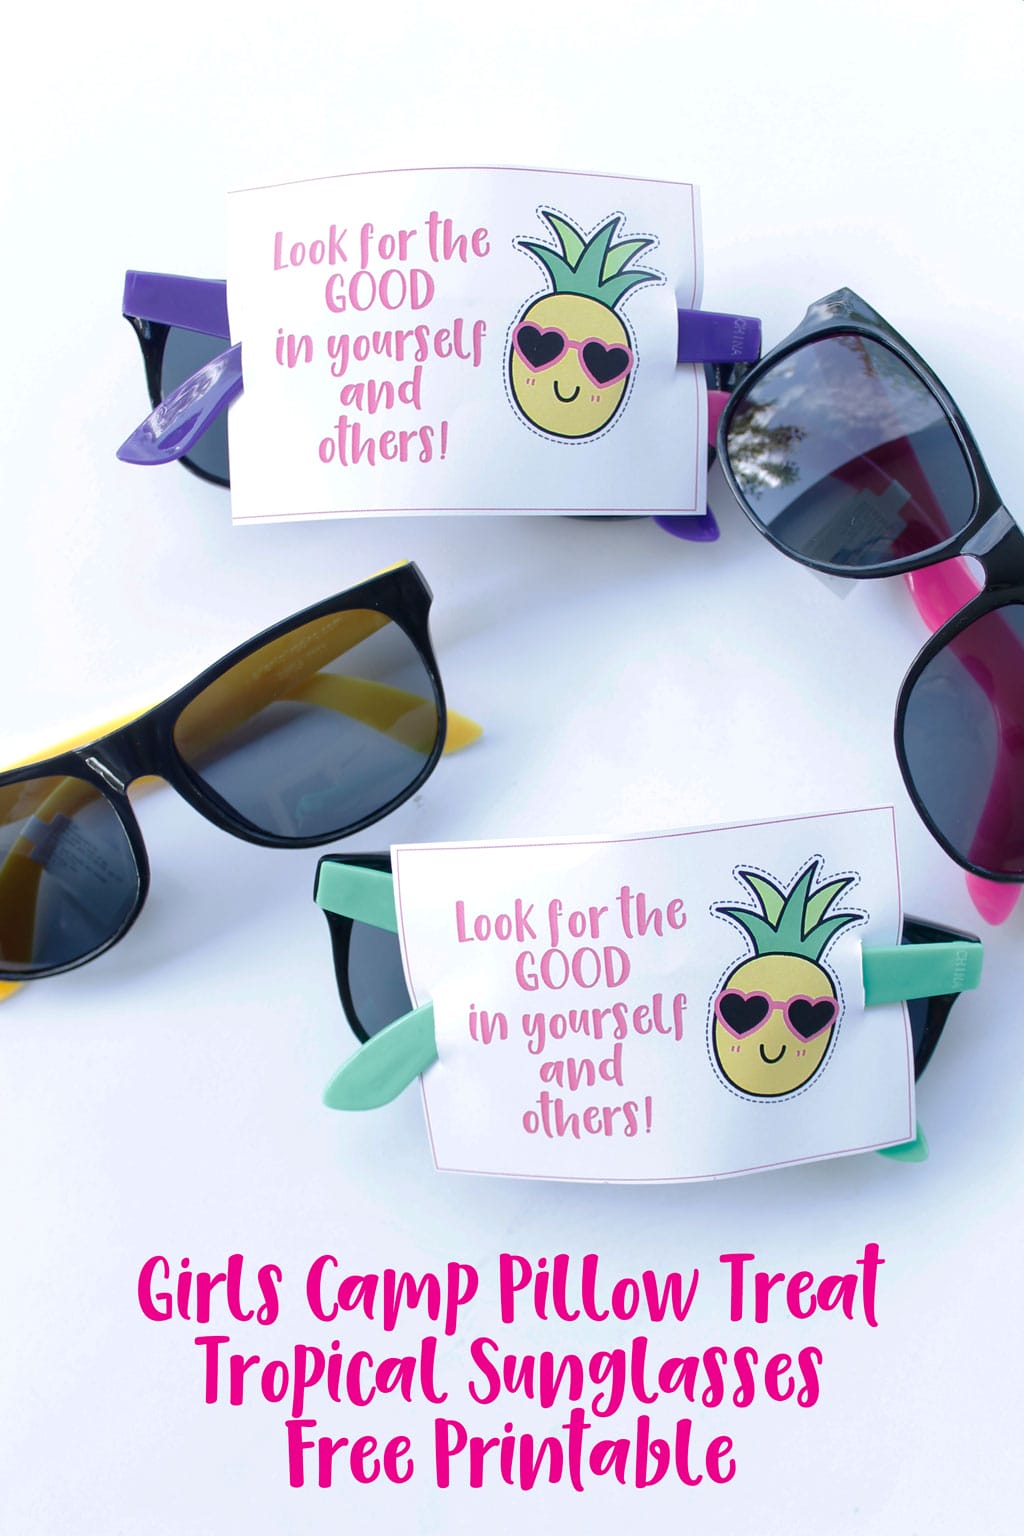 This Girls Camp Pillow Treat Tropical Sunglasses Free Printable is sure to be a hit with the young women in your group. #ldsgirlscamp #girlscamppillowtreat #girlscamptreat #girlscampprintables